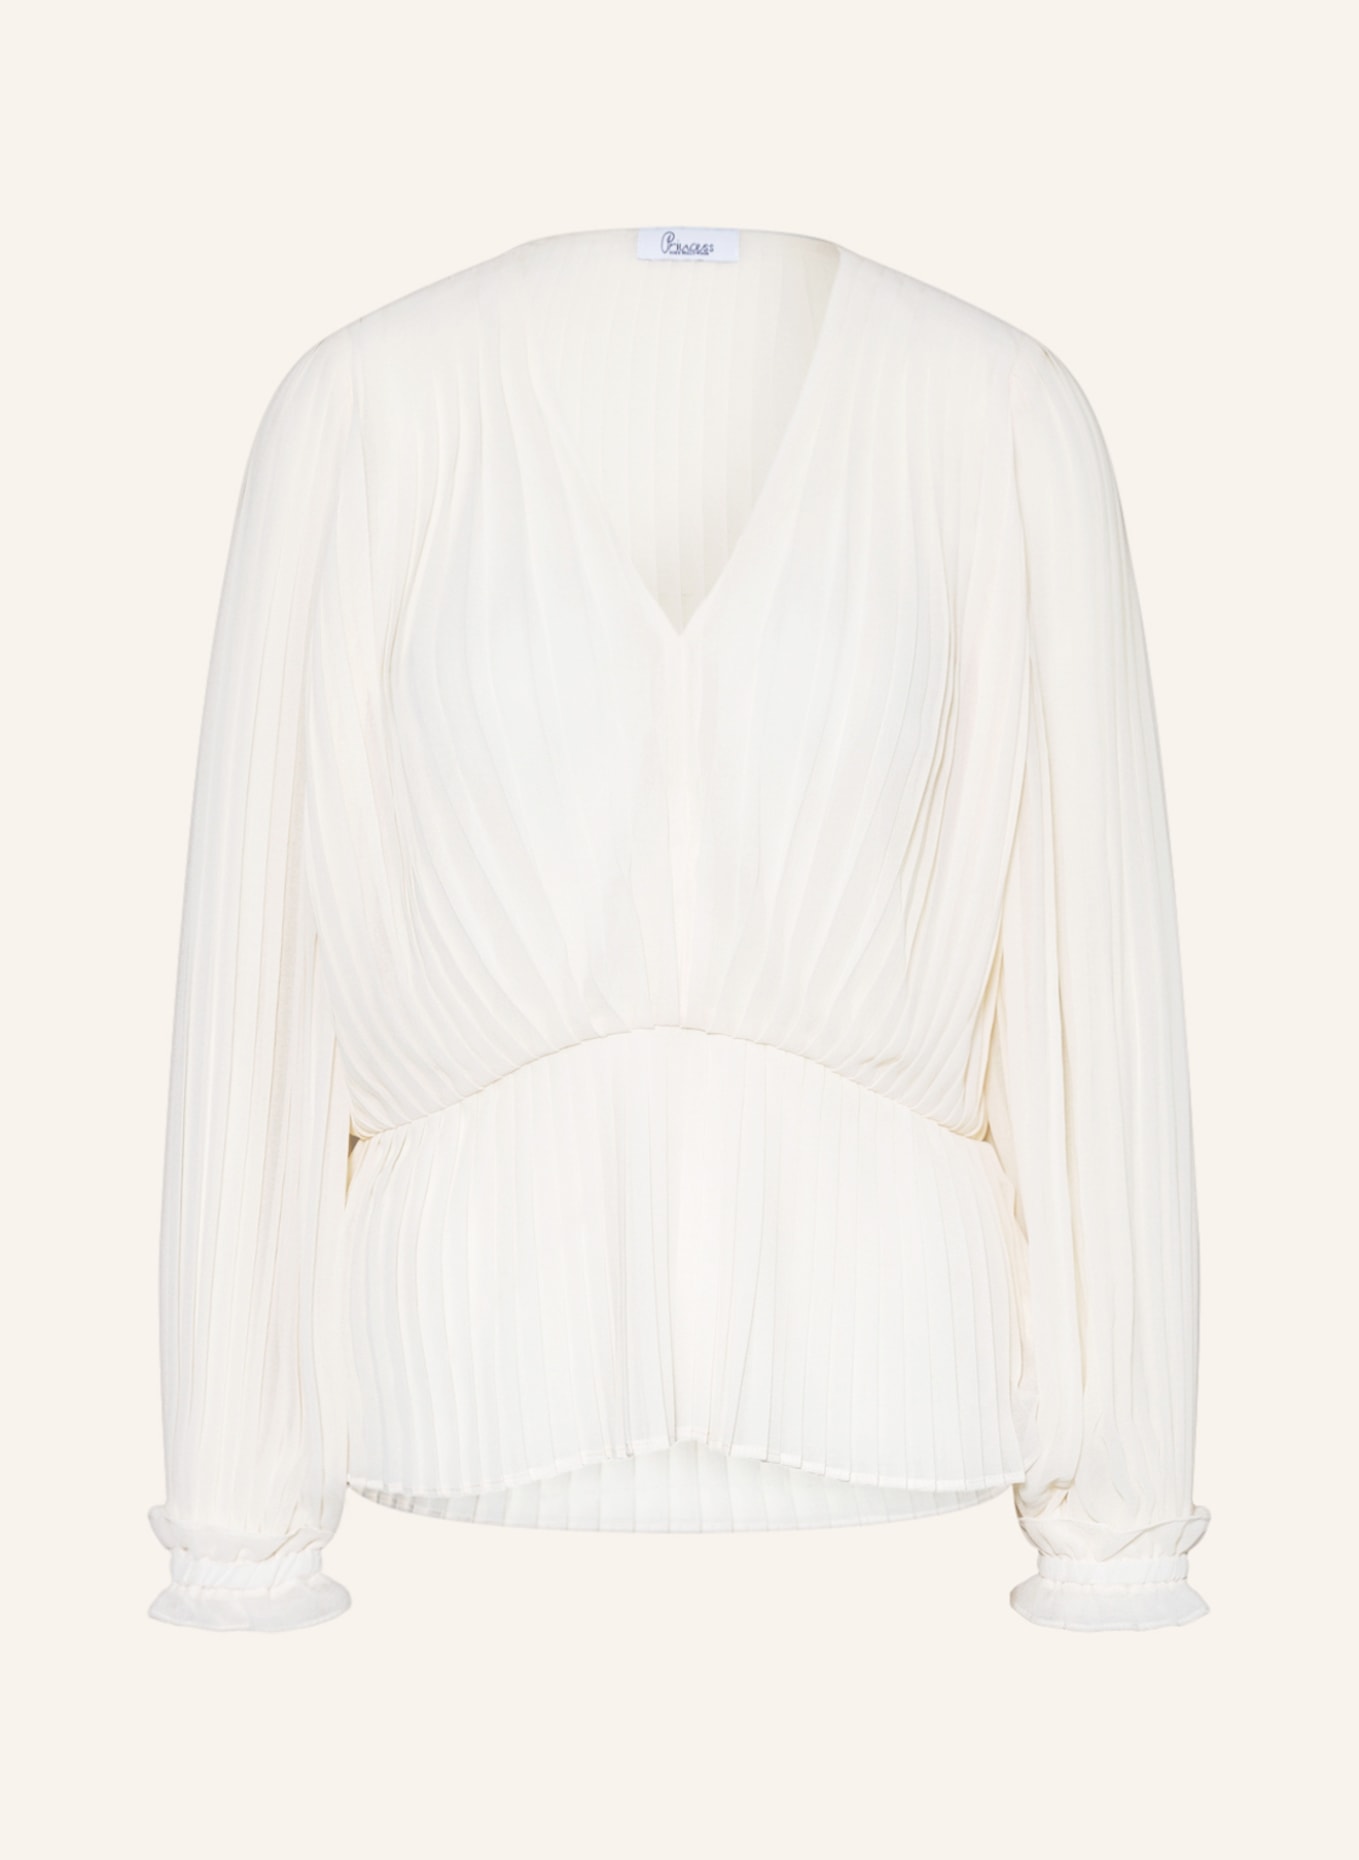 Princess GOES HOLLYWOOD Shirt blouse with pleats, Color: ECRU (Image 1)